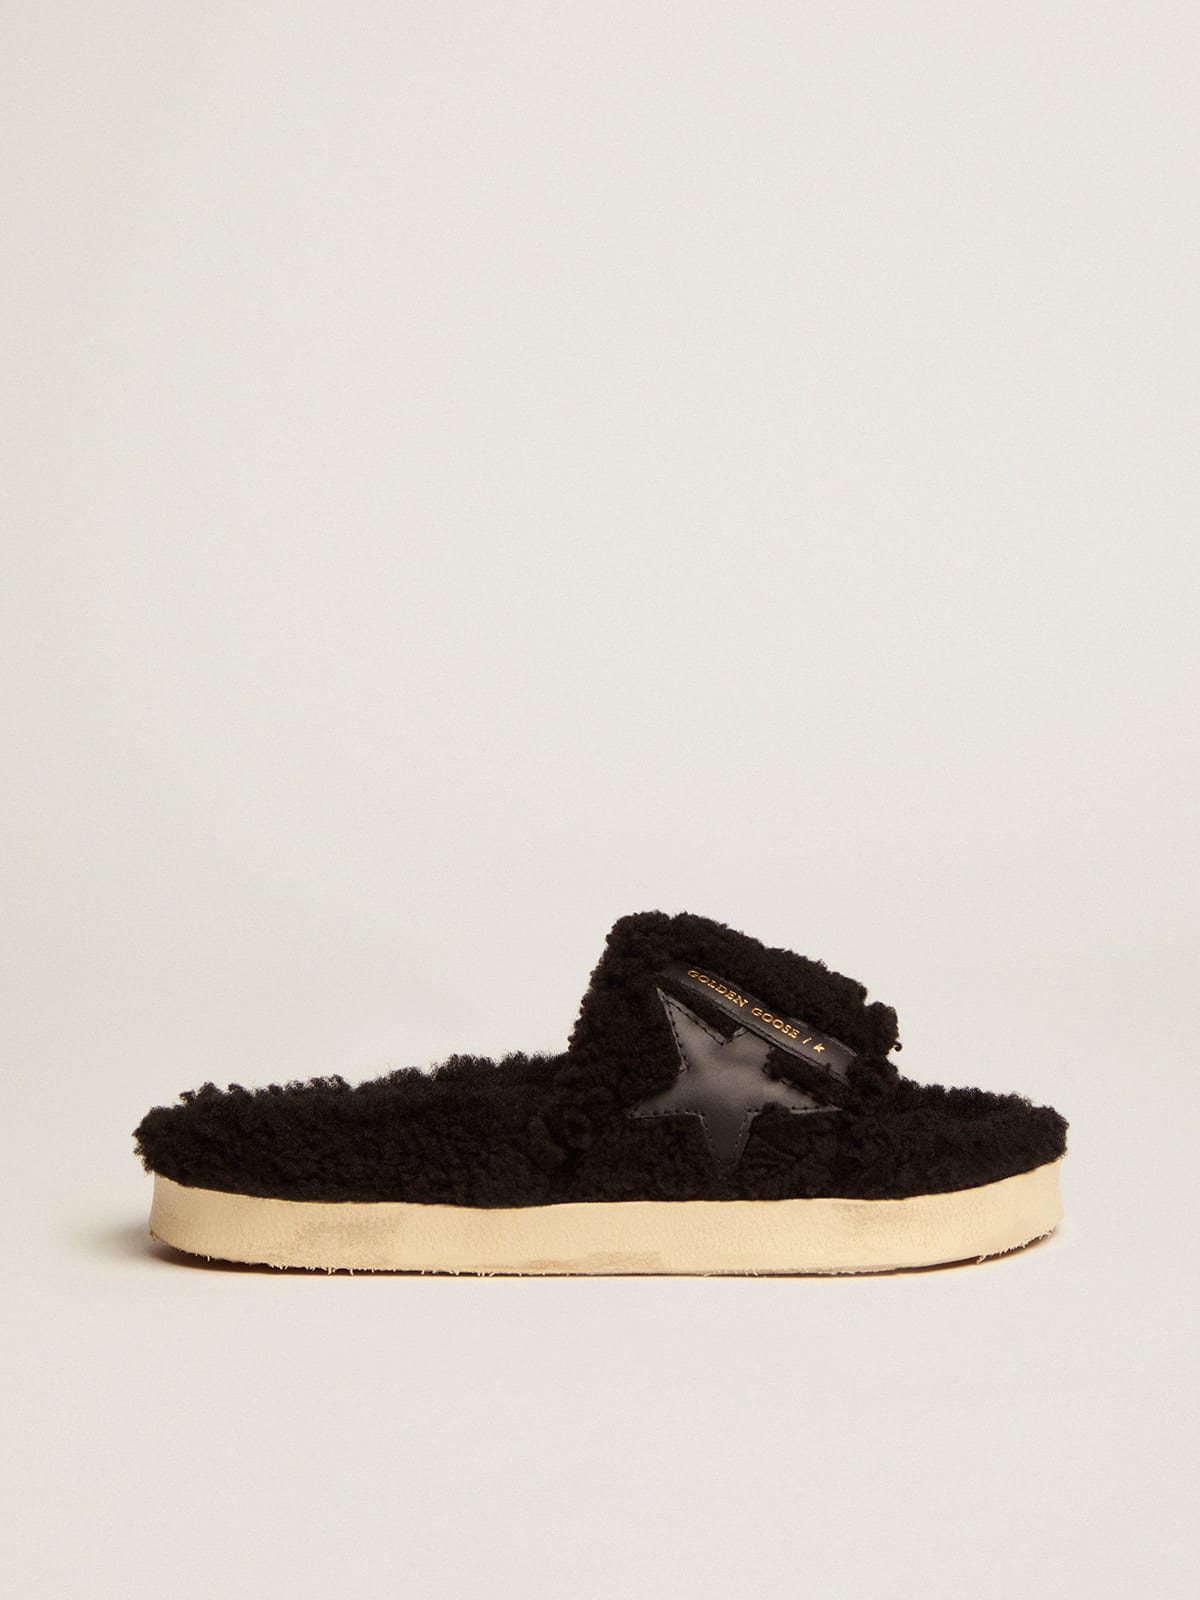 Poolstars in black shearling with star in tone-on-tone leather